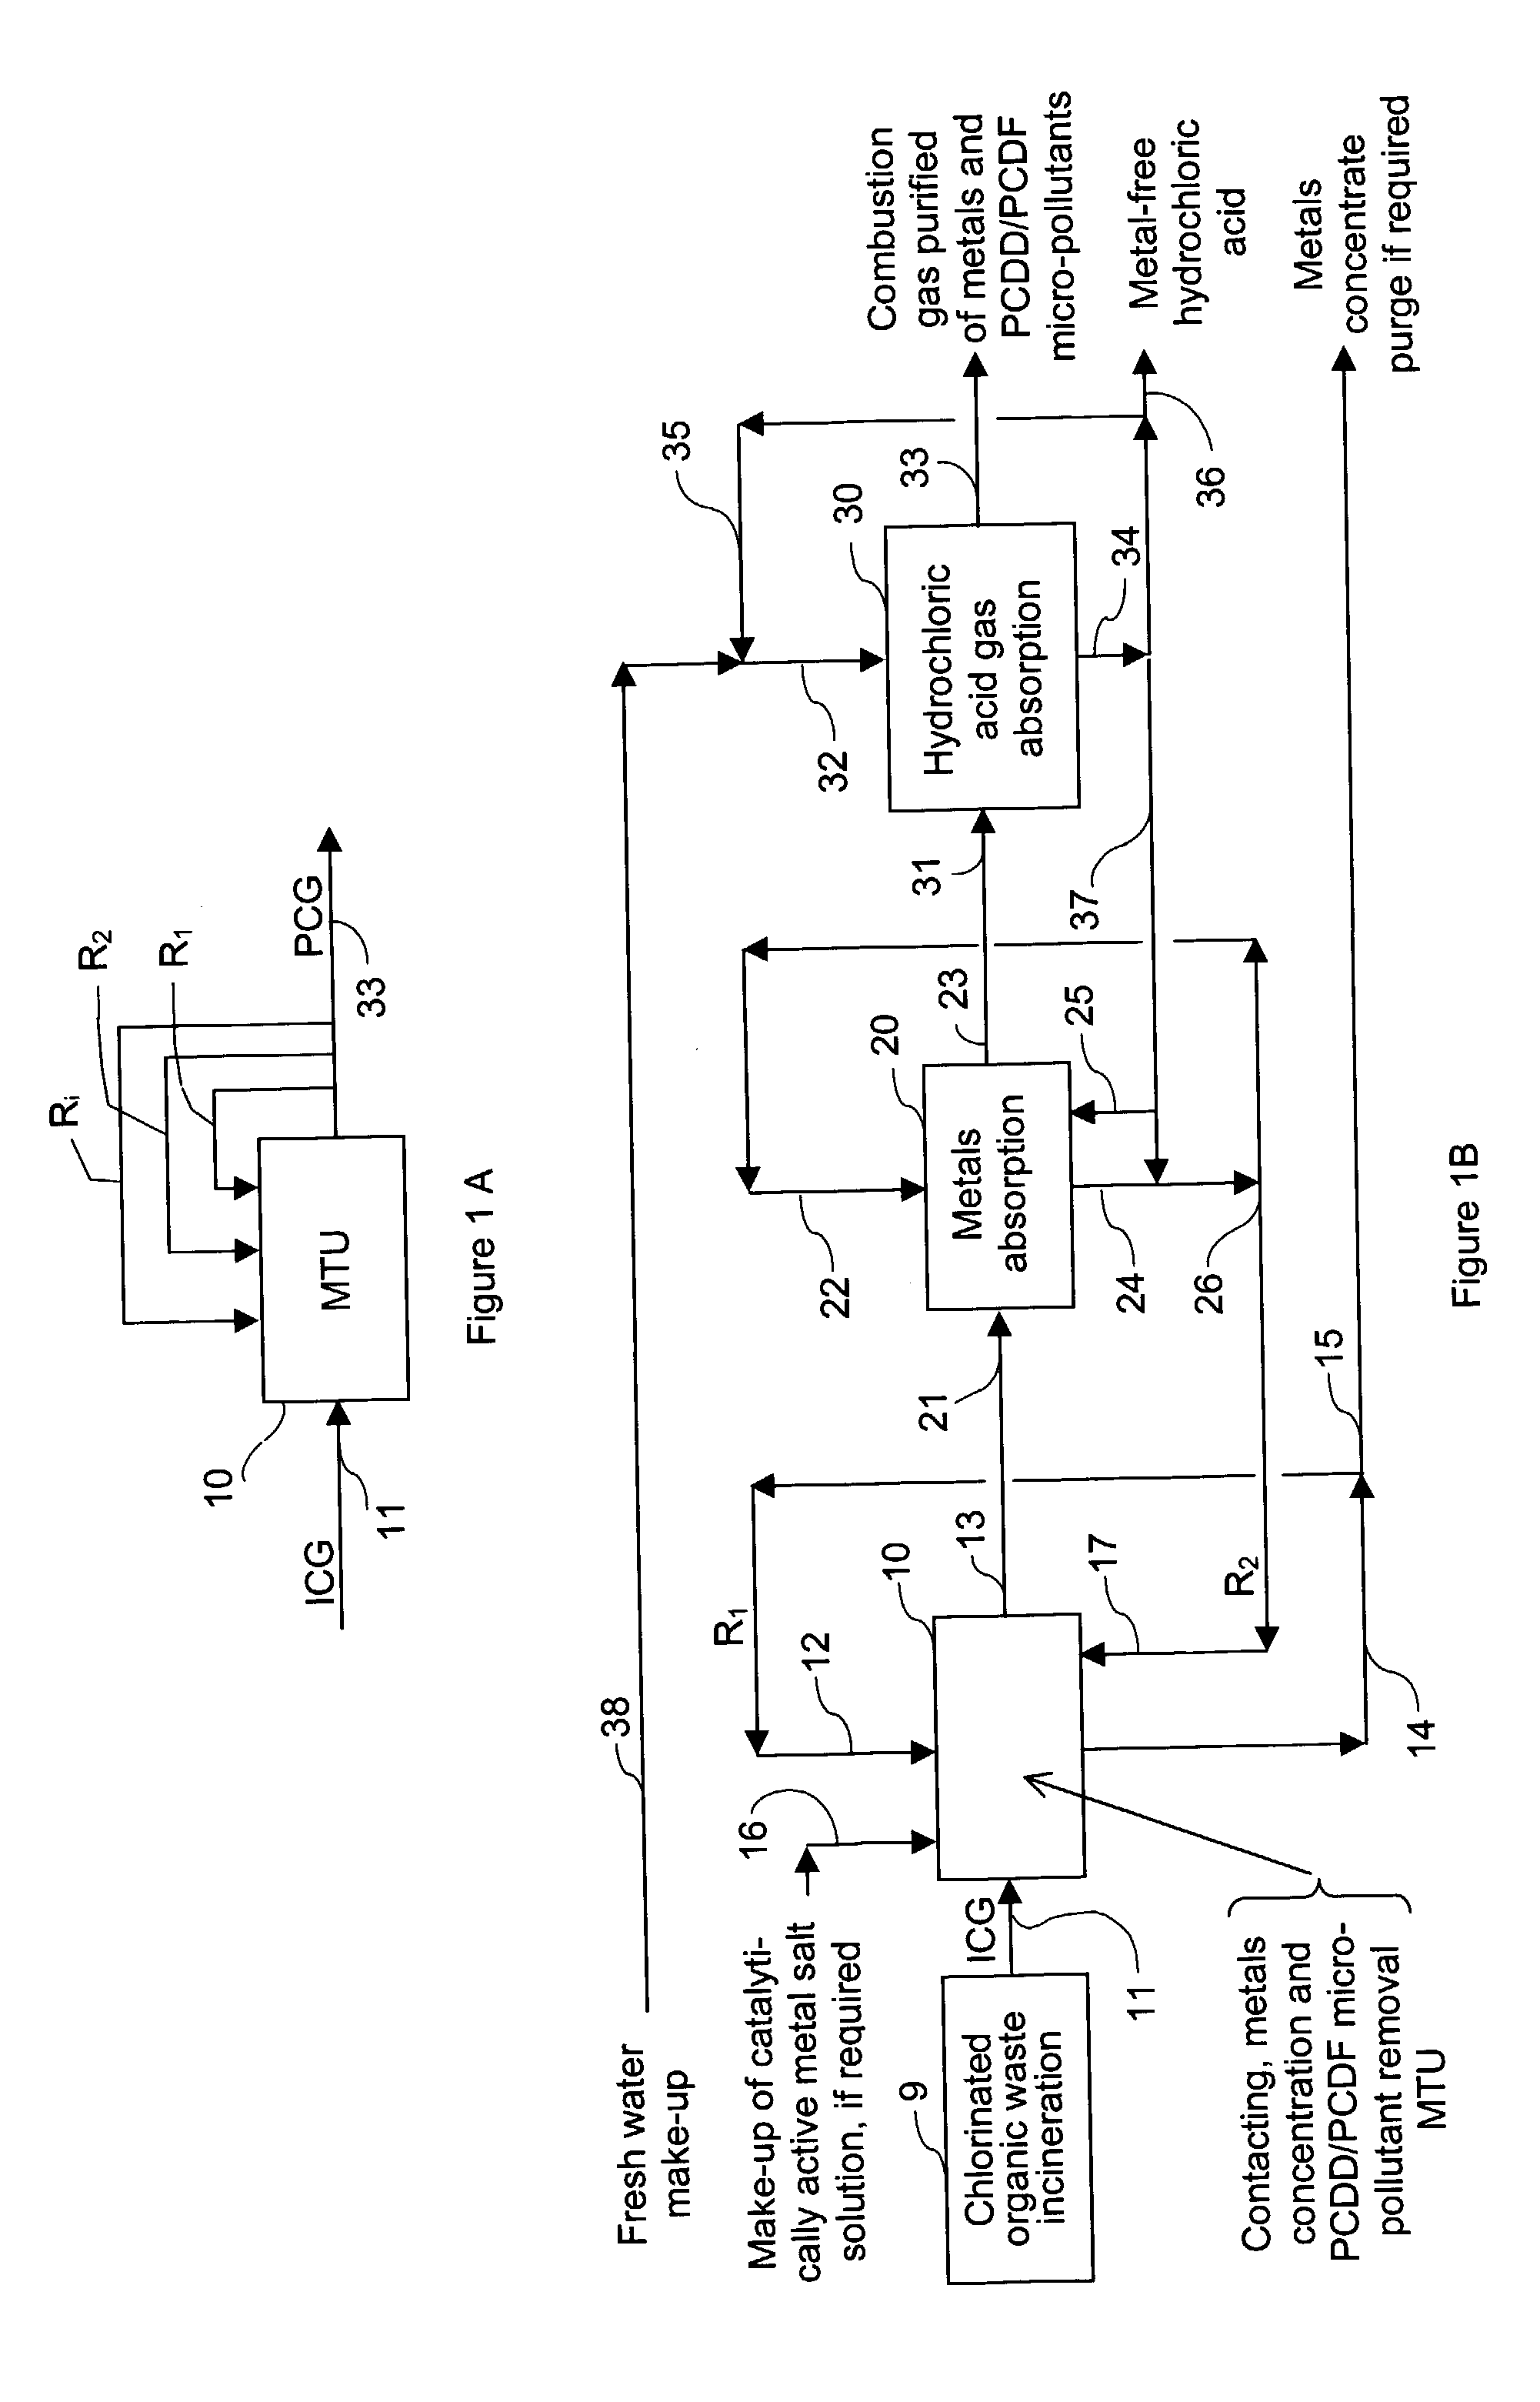 Method and apparatus for the removal of PCDD and PCDF micro-pollutants from the combustion gases resulting from the incineration of chlorinated organic wastes